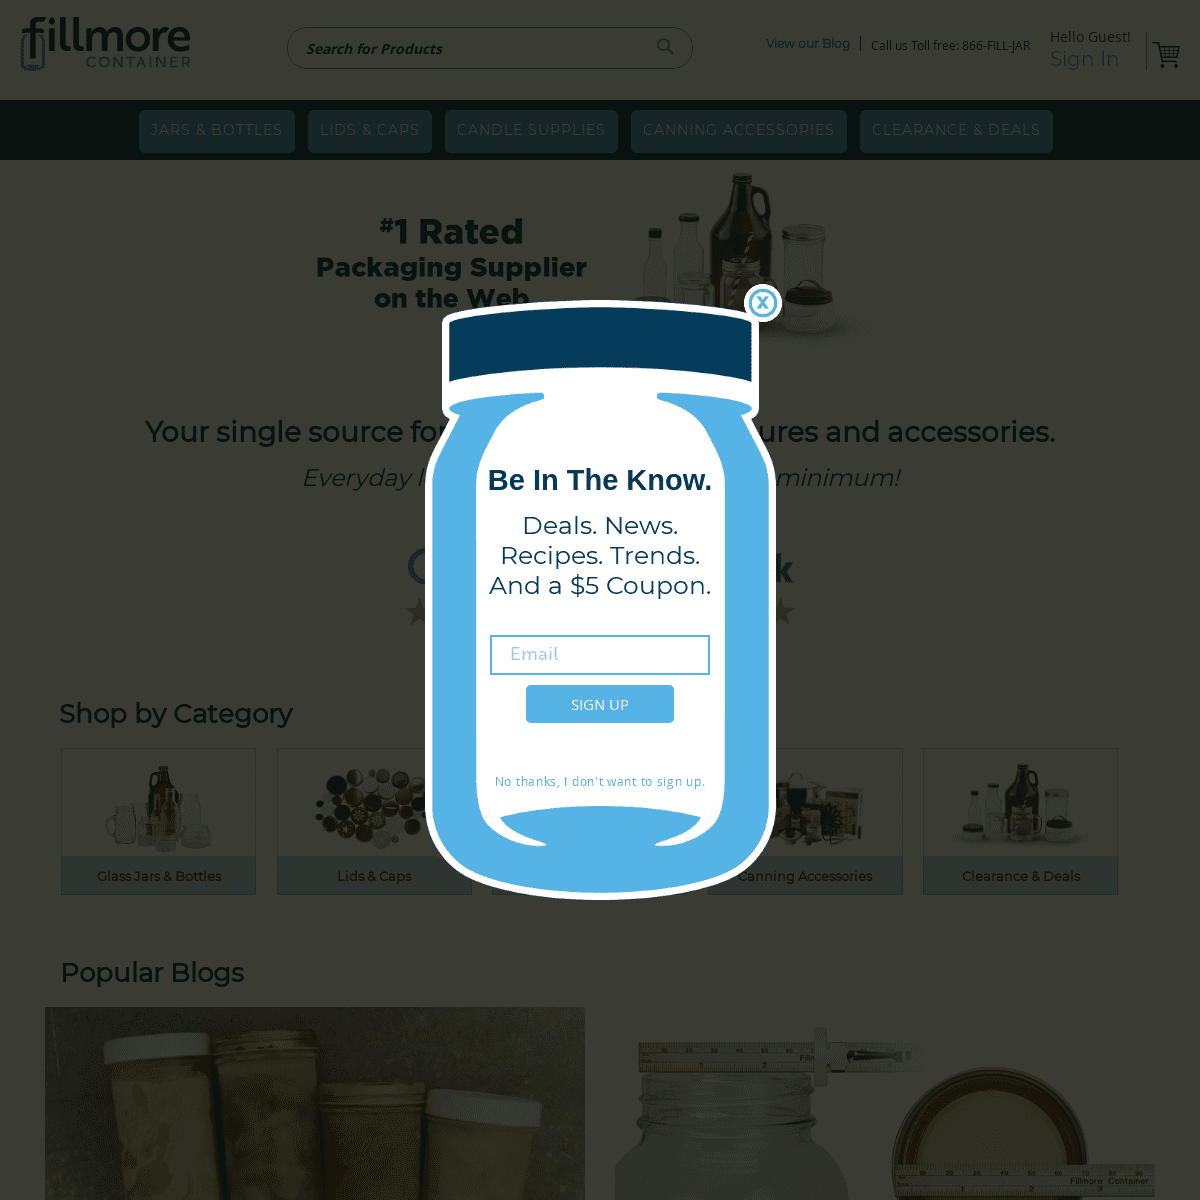 A complete backup of fillmorecontainer.com